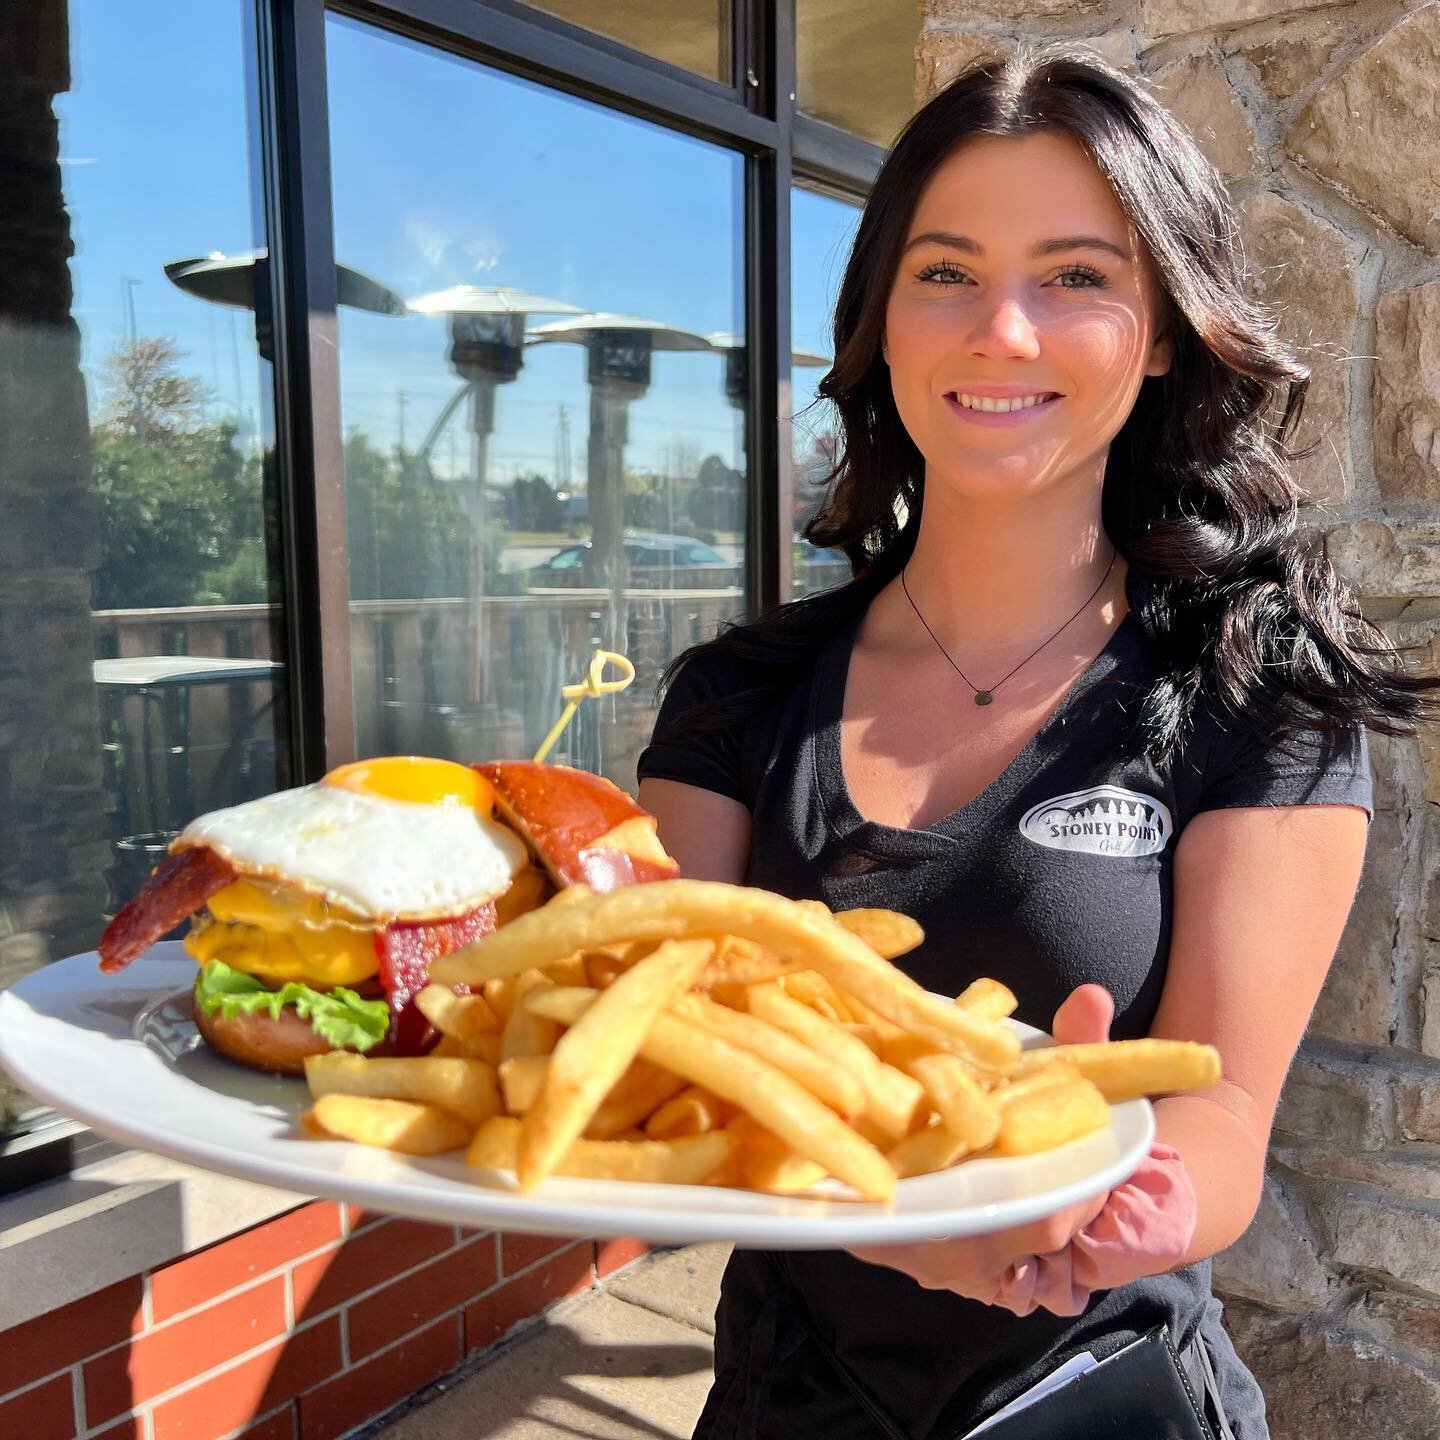 Happy National Cheeseburger Day! 🍔 If you&rsquo;re looking for an award winning burger close to you for lunch or dinner&hellip; Stoney Point Grill is serving them up 7 days a week!